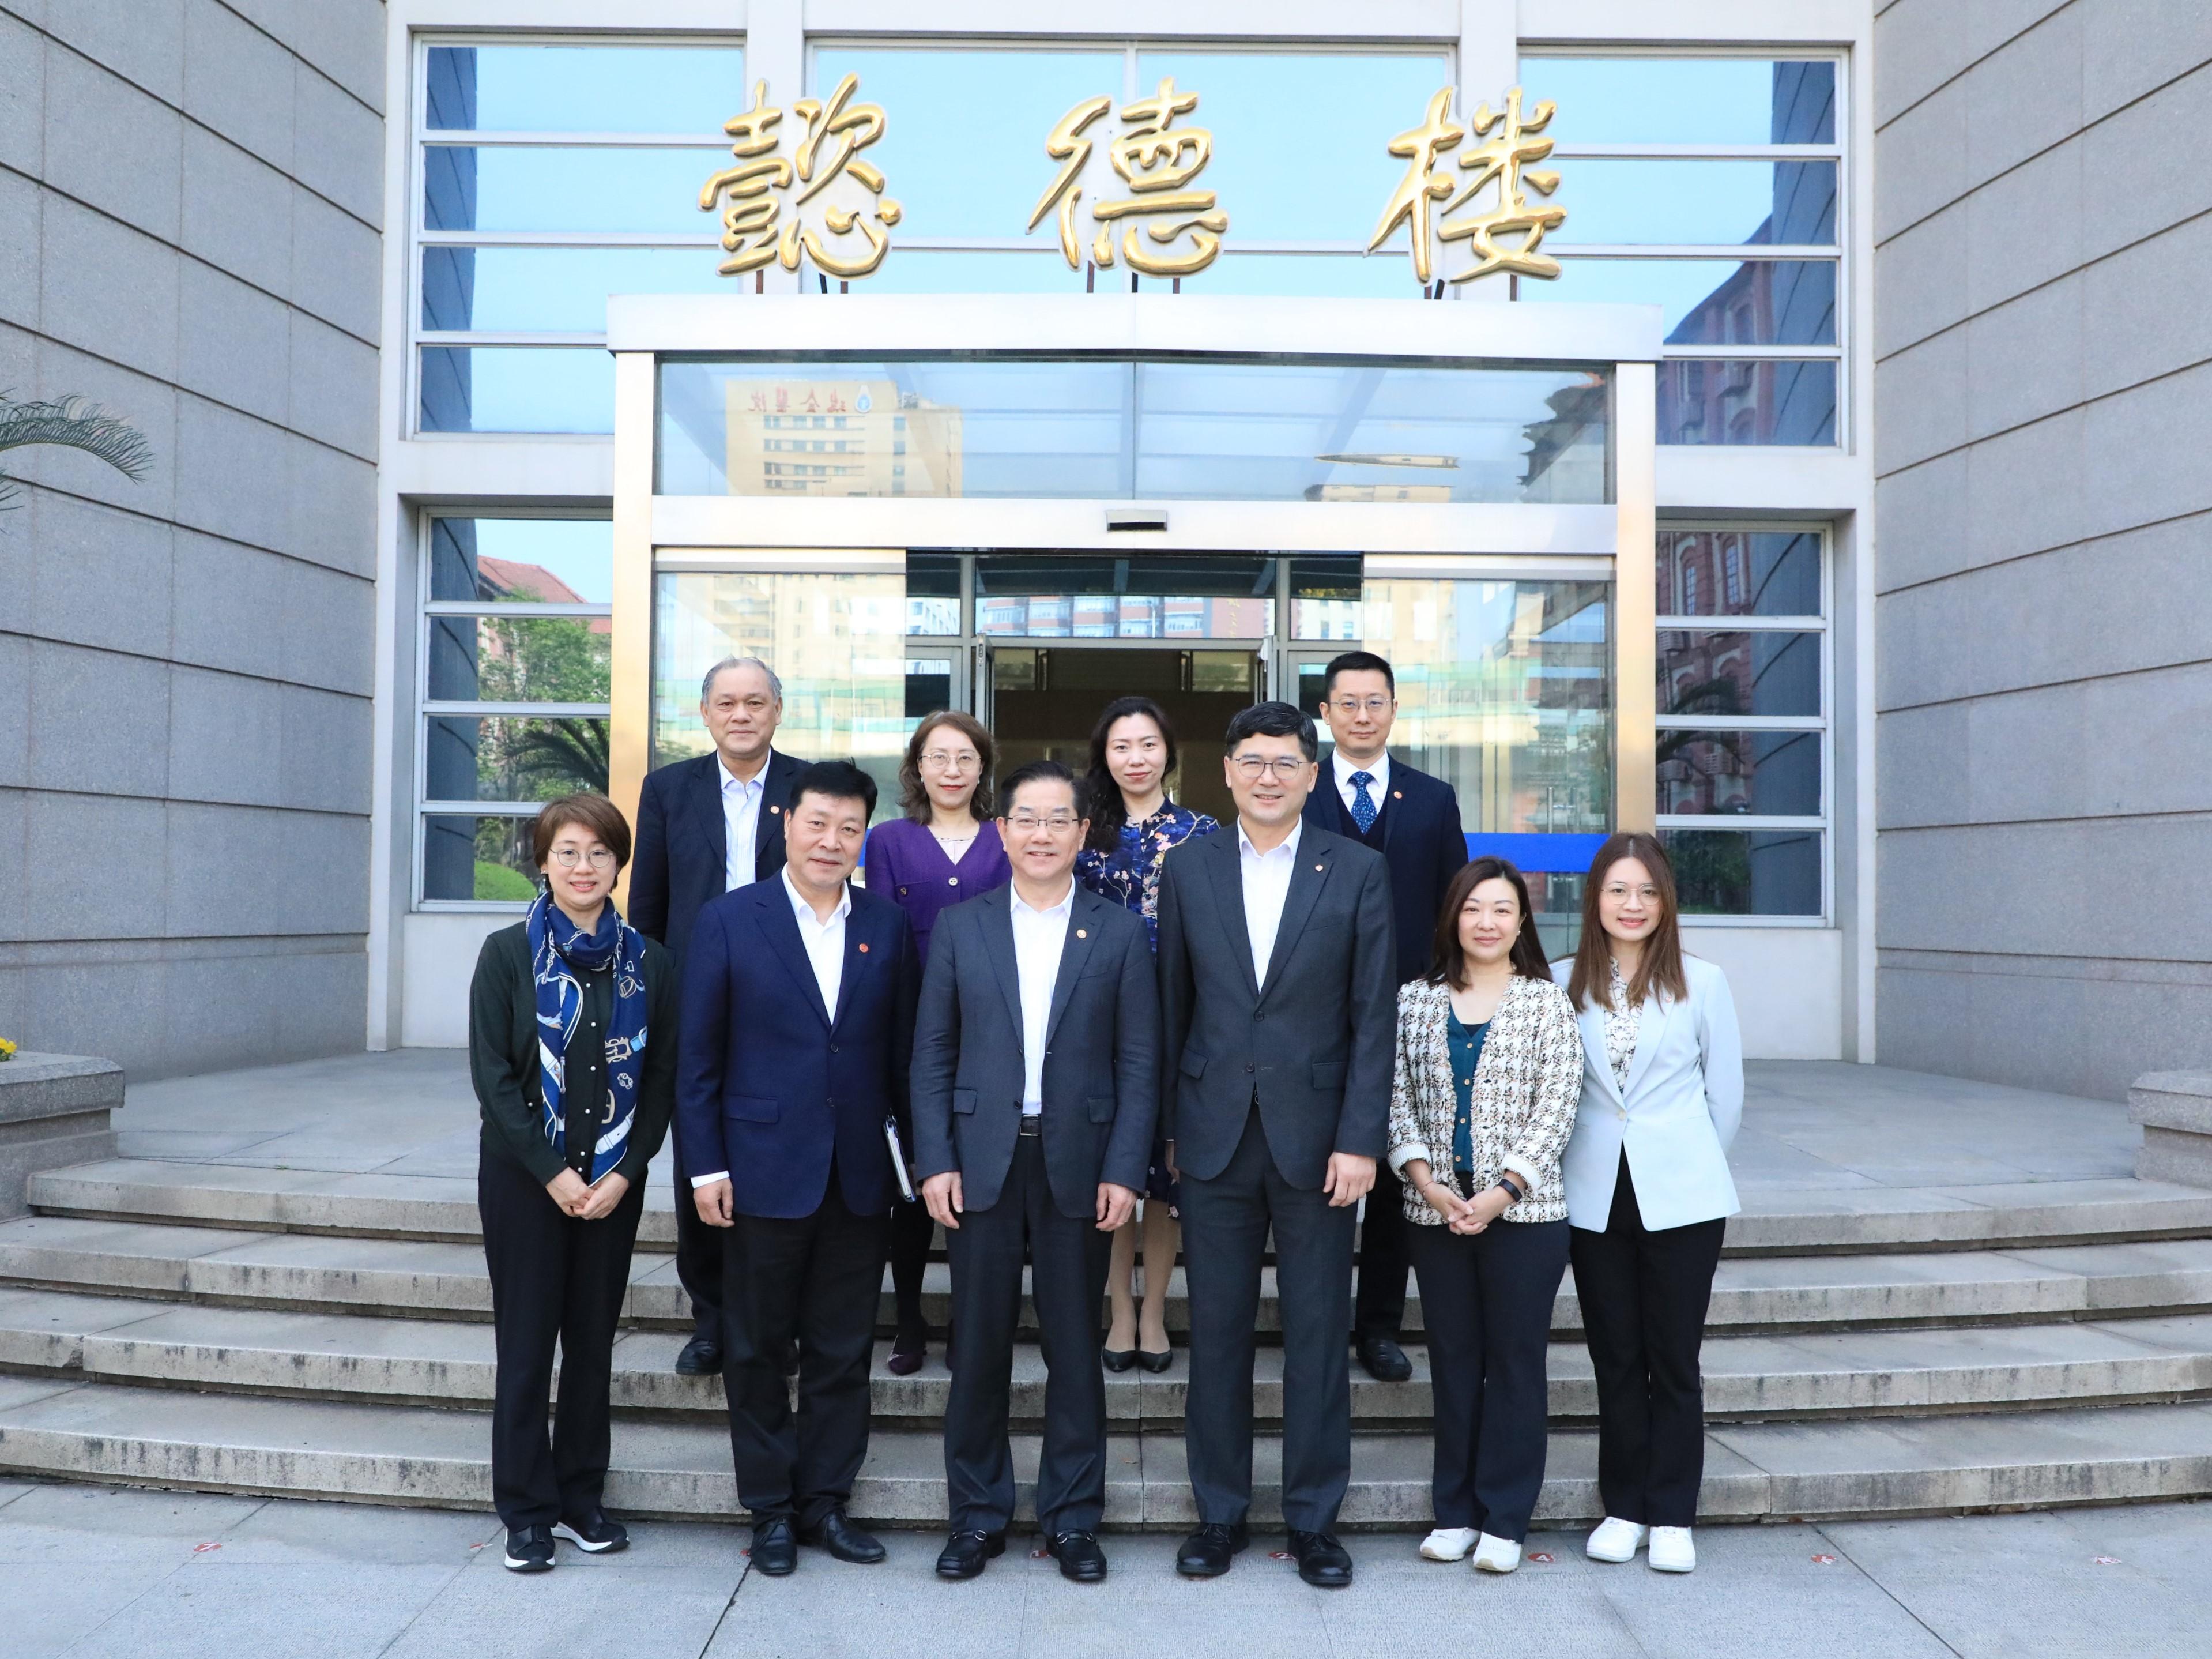 The Hospital Authority delegation met with representatives of the Shanghai Jiao Tong University School of Medicine in Shanghai today (April 9). 


